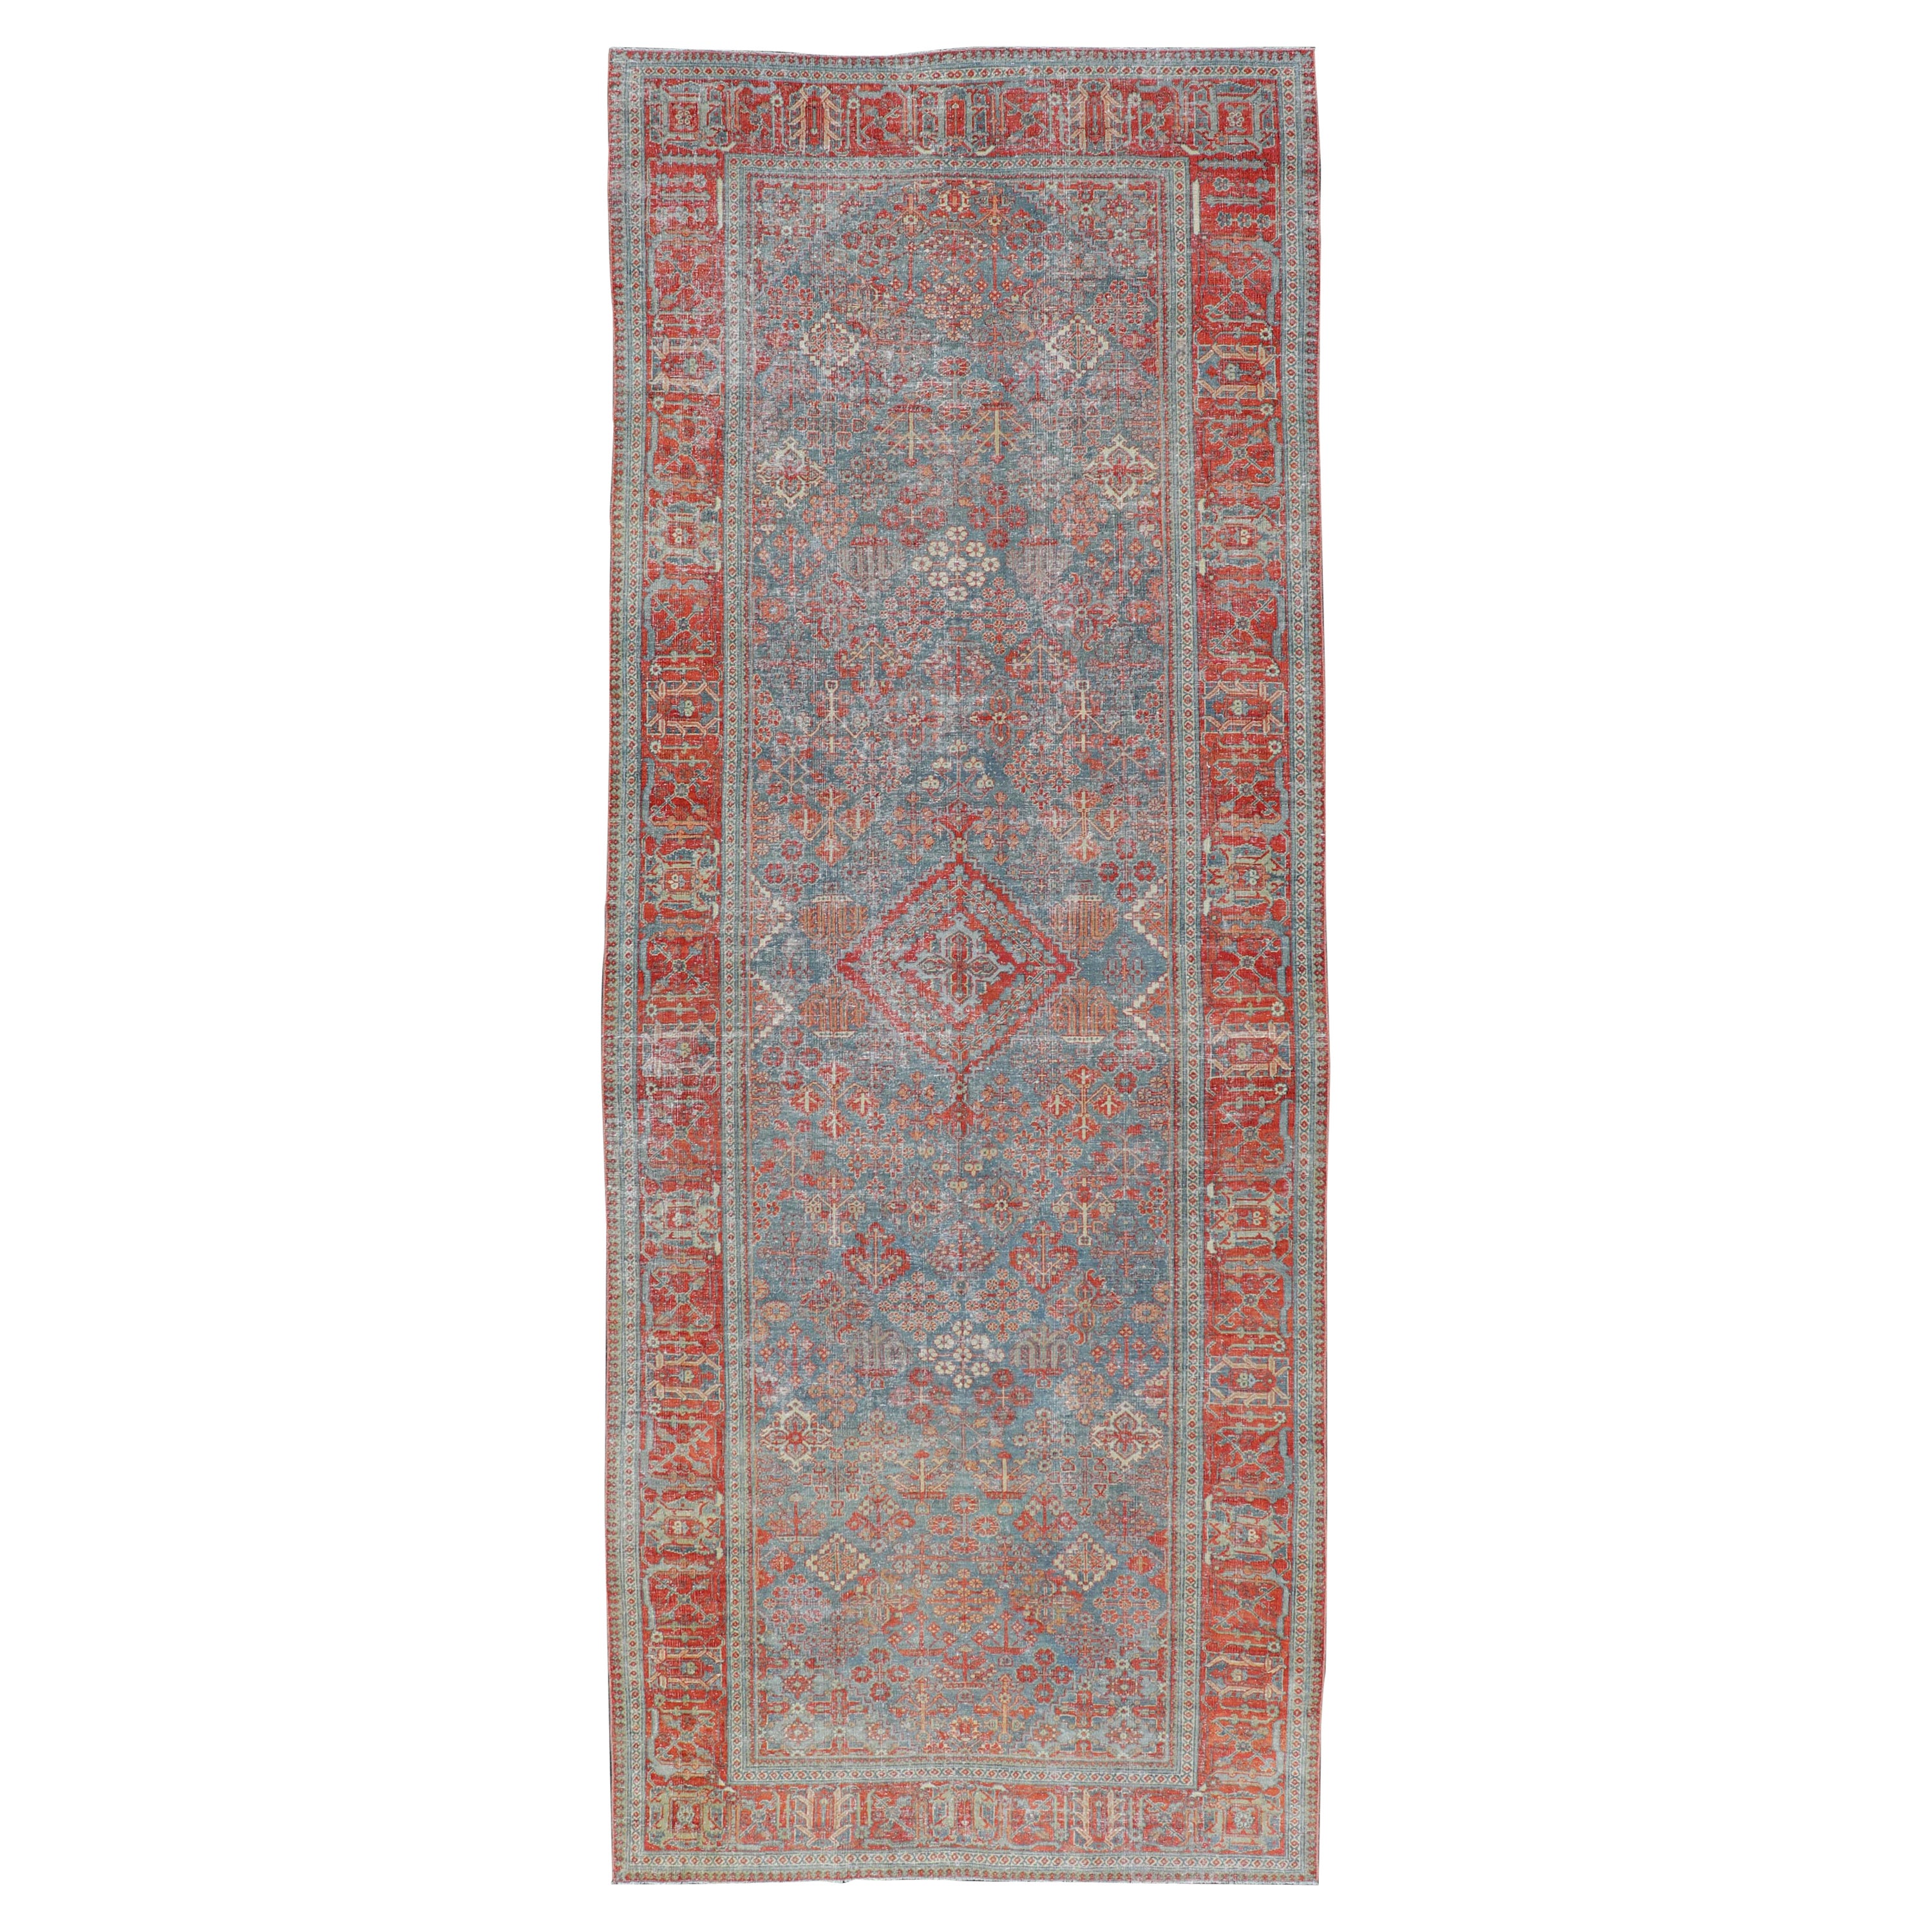 Antique Persian Joshaghan Gallery Rug with All-Over Sub-Geometric Diamond Design